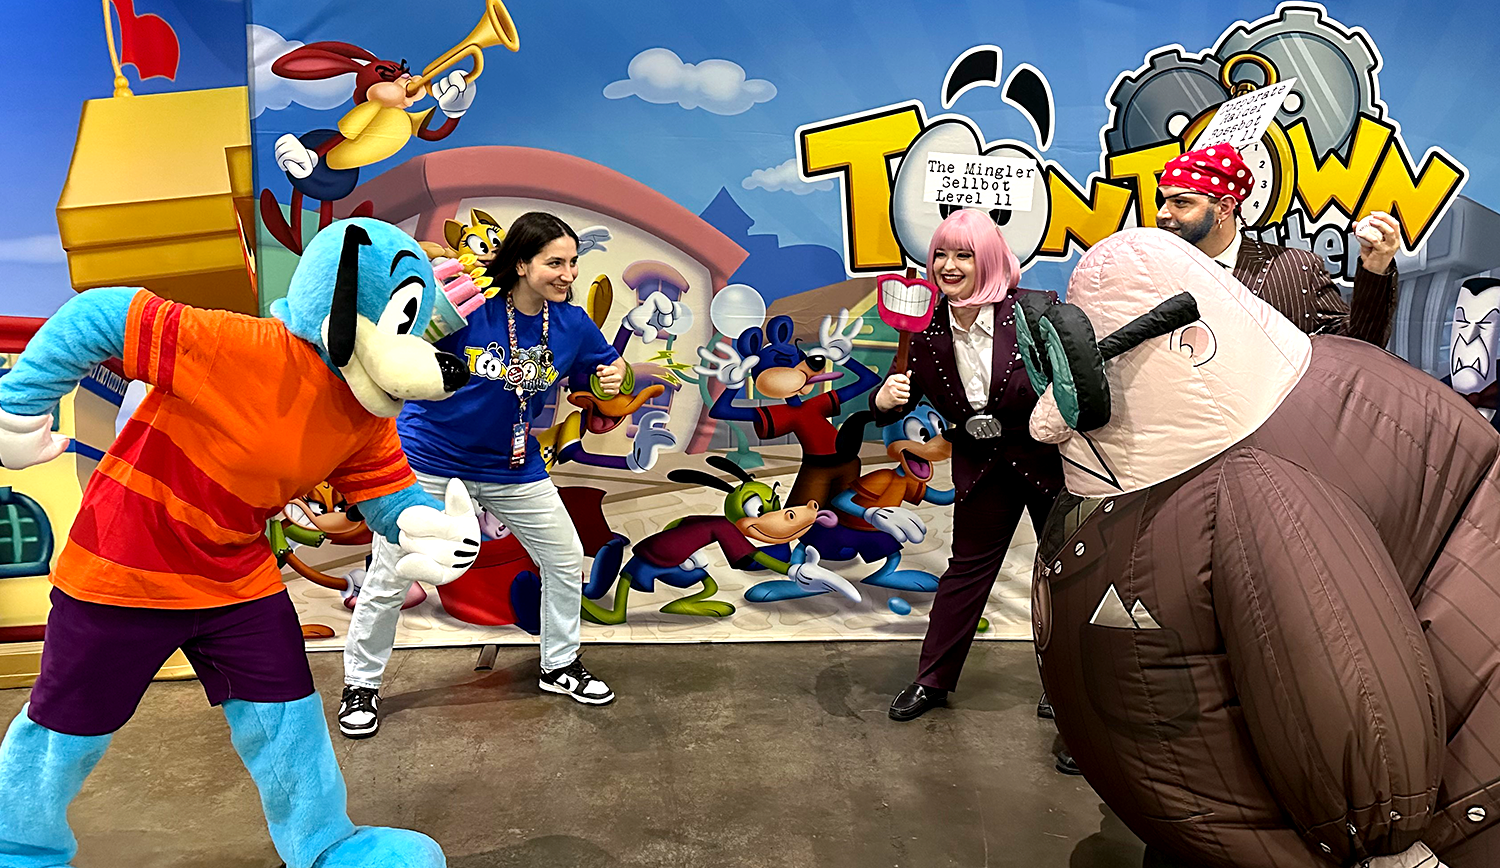 Toons and Cogs battle it out!